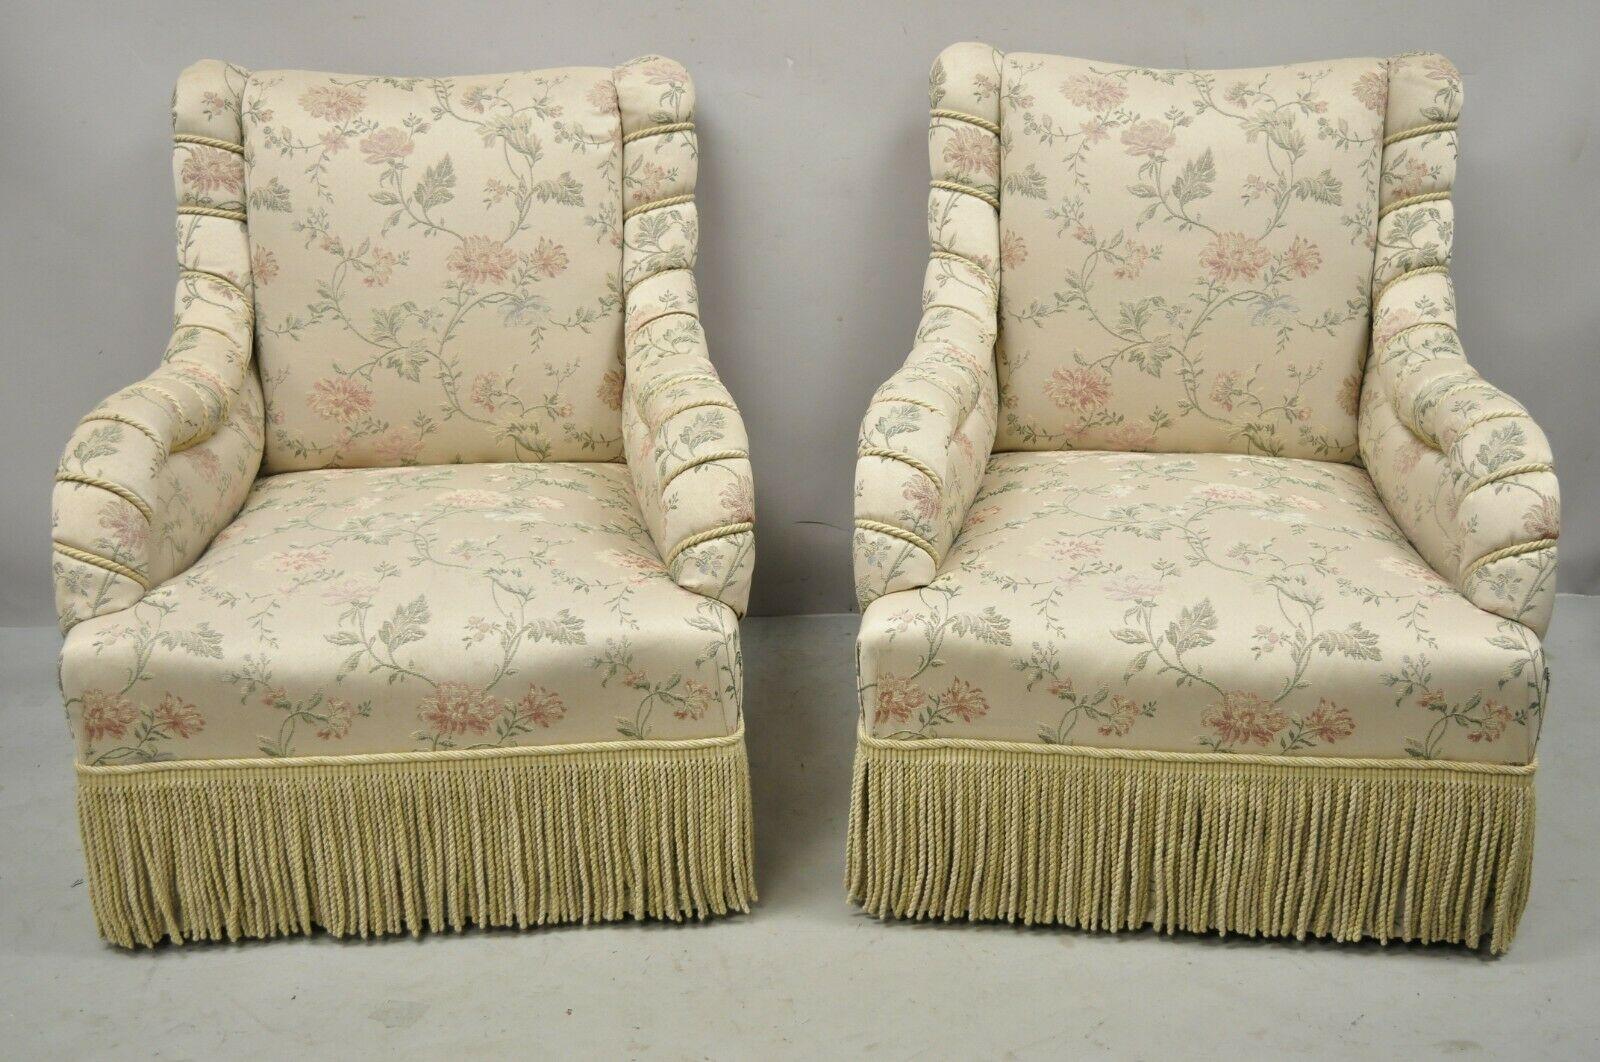 Vintage French Art Deco style rolled arm pink gold club lounge chairs - a pair. Item features brass rolling casters, fringe skirt, gold/pink/beige silk upholstery with floral print and rope wrapped arms, solid wood frames, very nice pair, quality